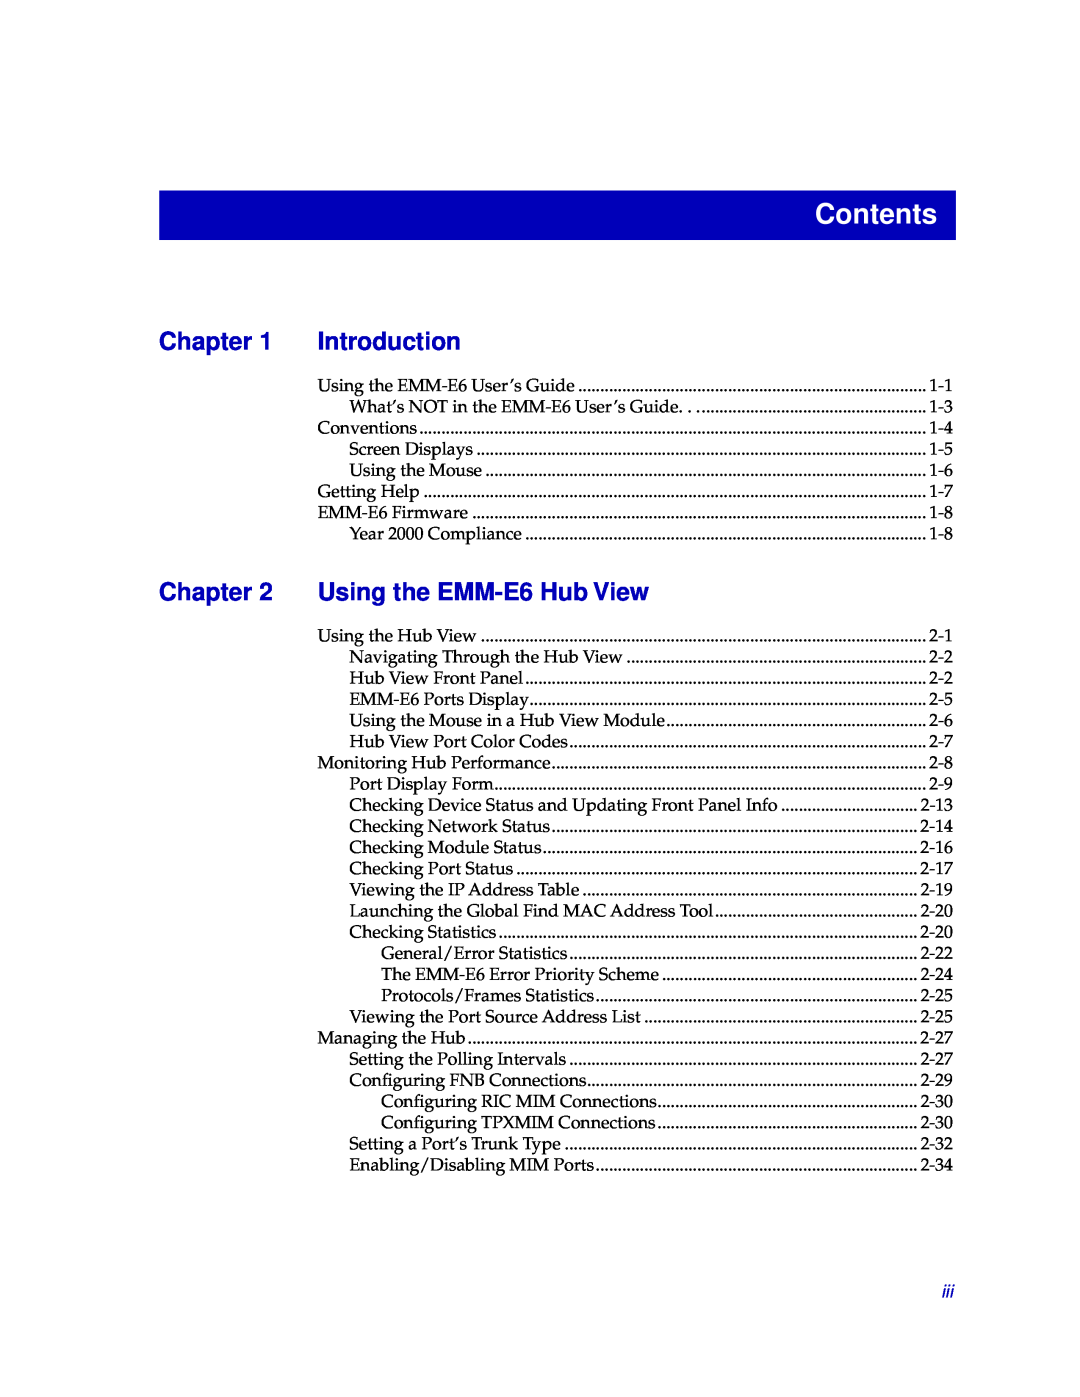 Cabletron Systems manual Contents, Chapter, Using the EMM-E6 Hub View, Introduction 